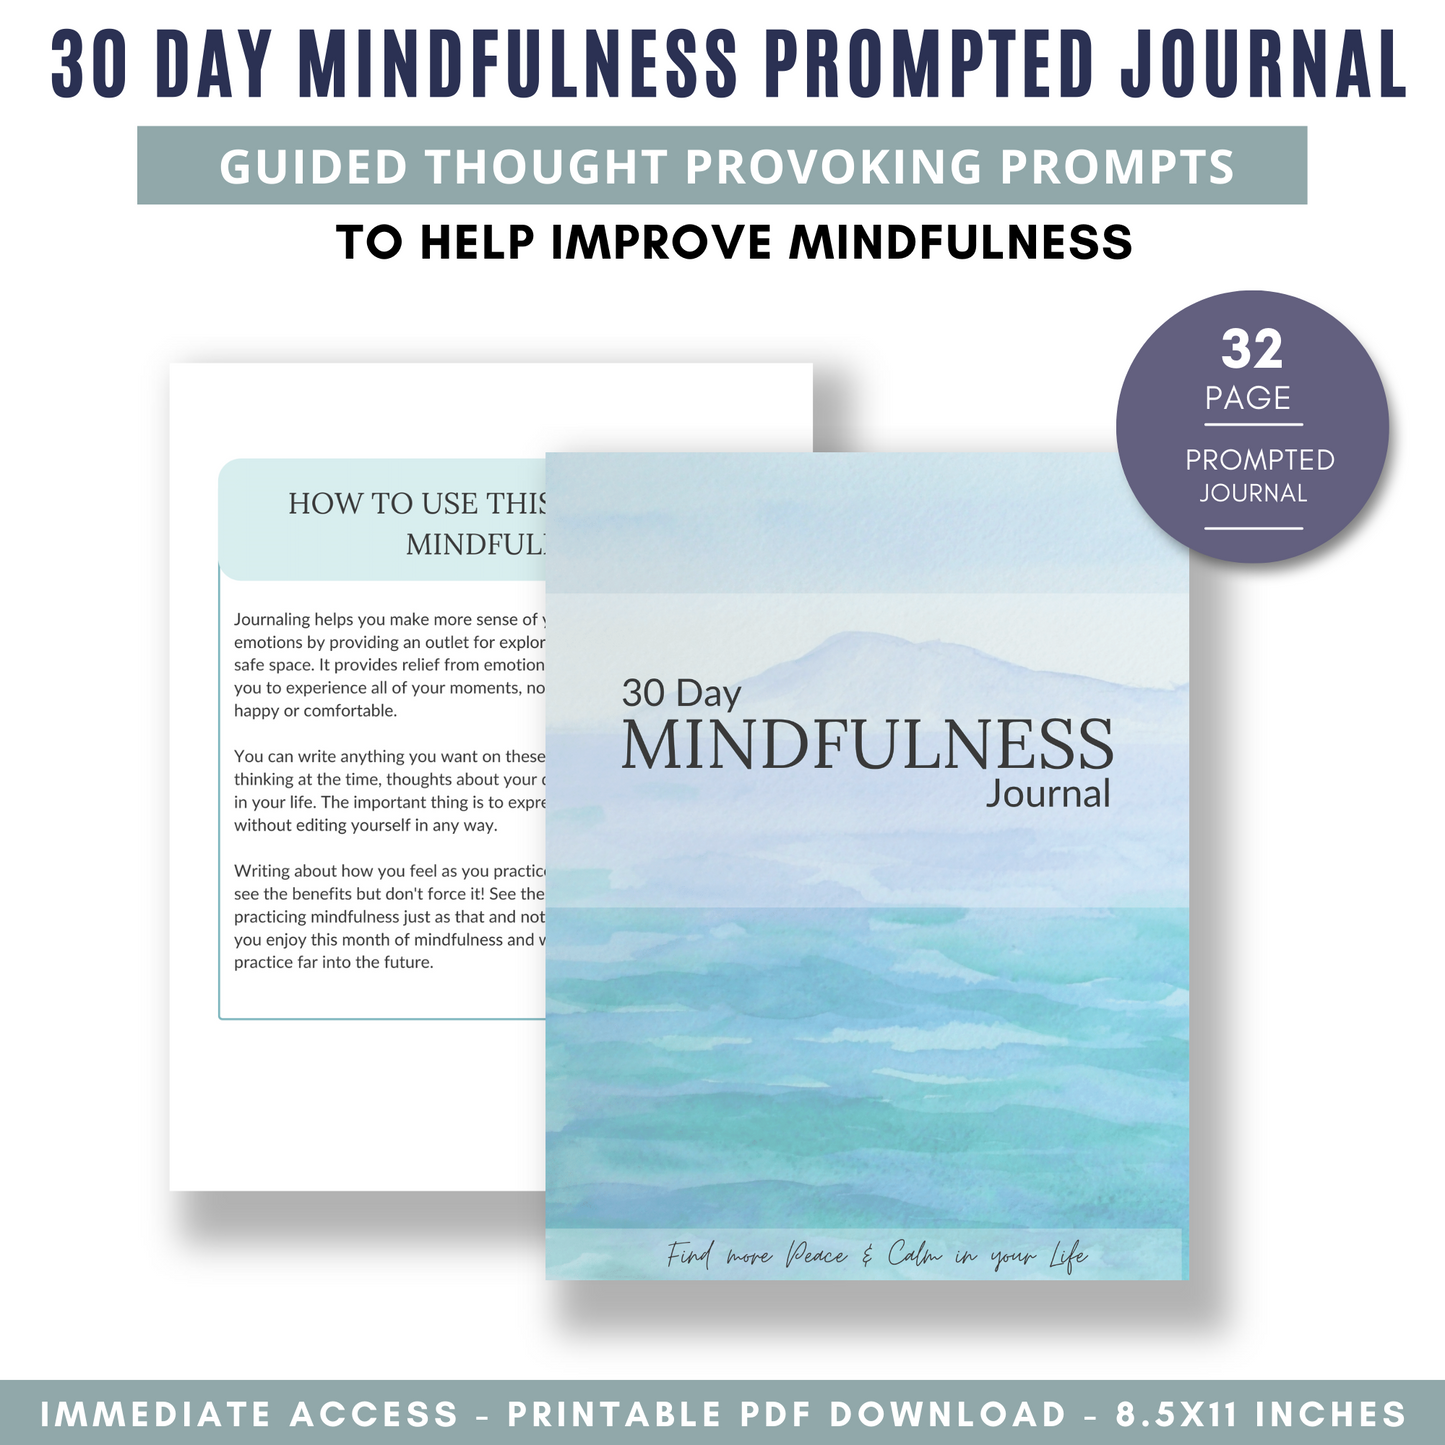 30 Day Mindfulness Prompted Journal